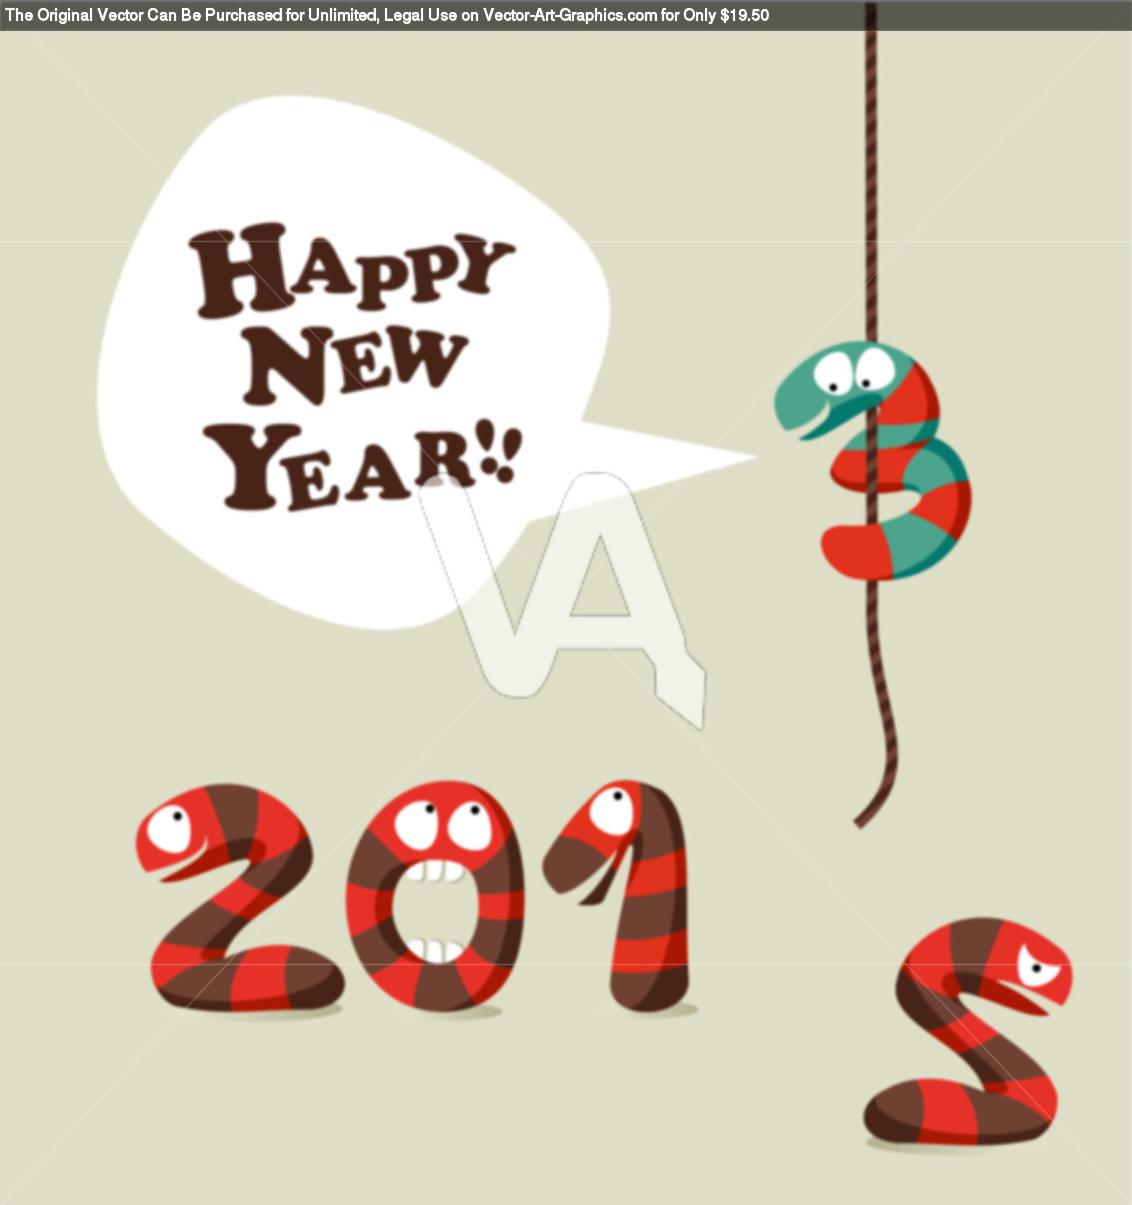 New Year Greetings Message With Images